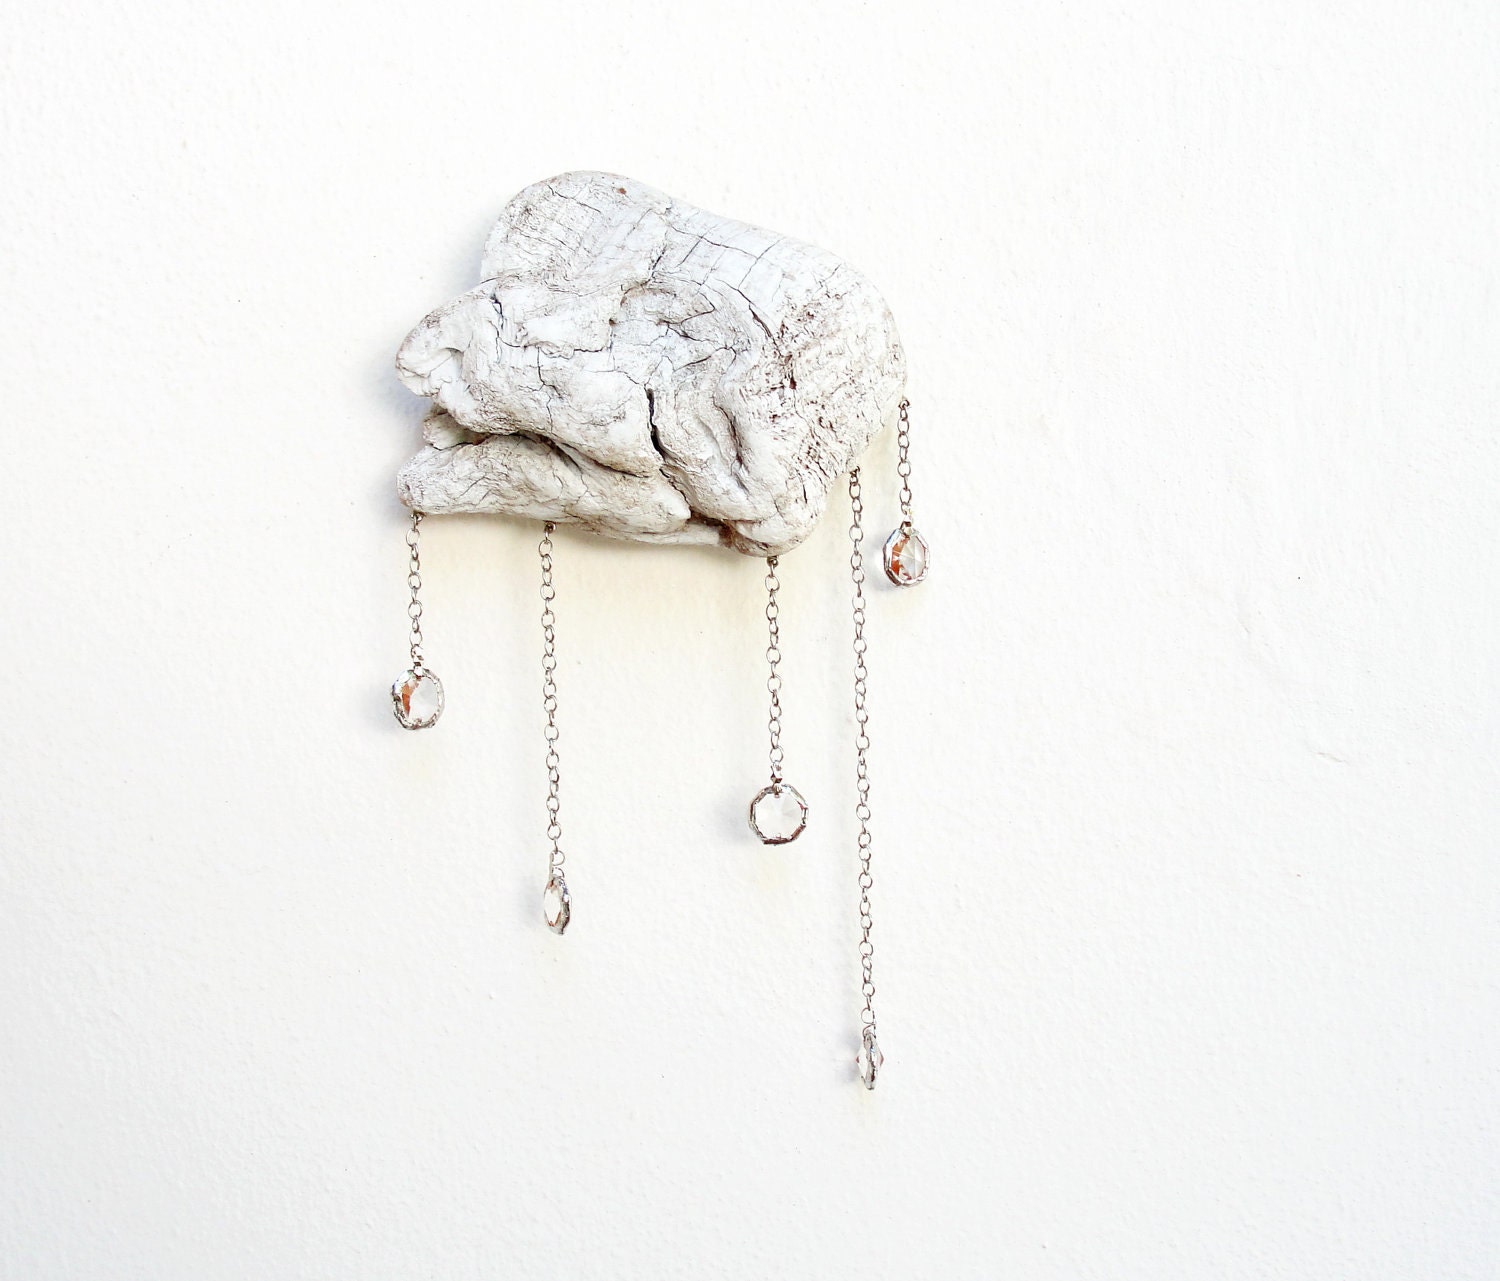 Driftwood Cloud with Vintage Crystal Raindrops - Wall Hanging - Small